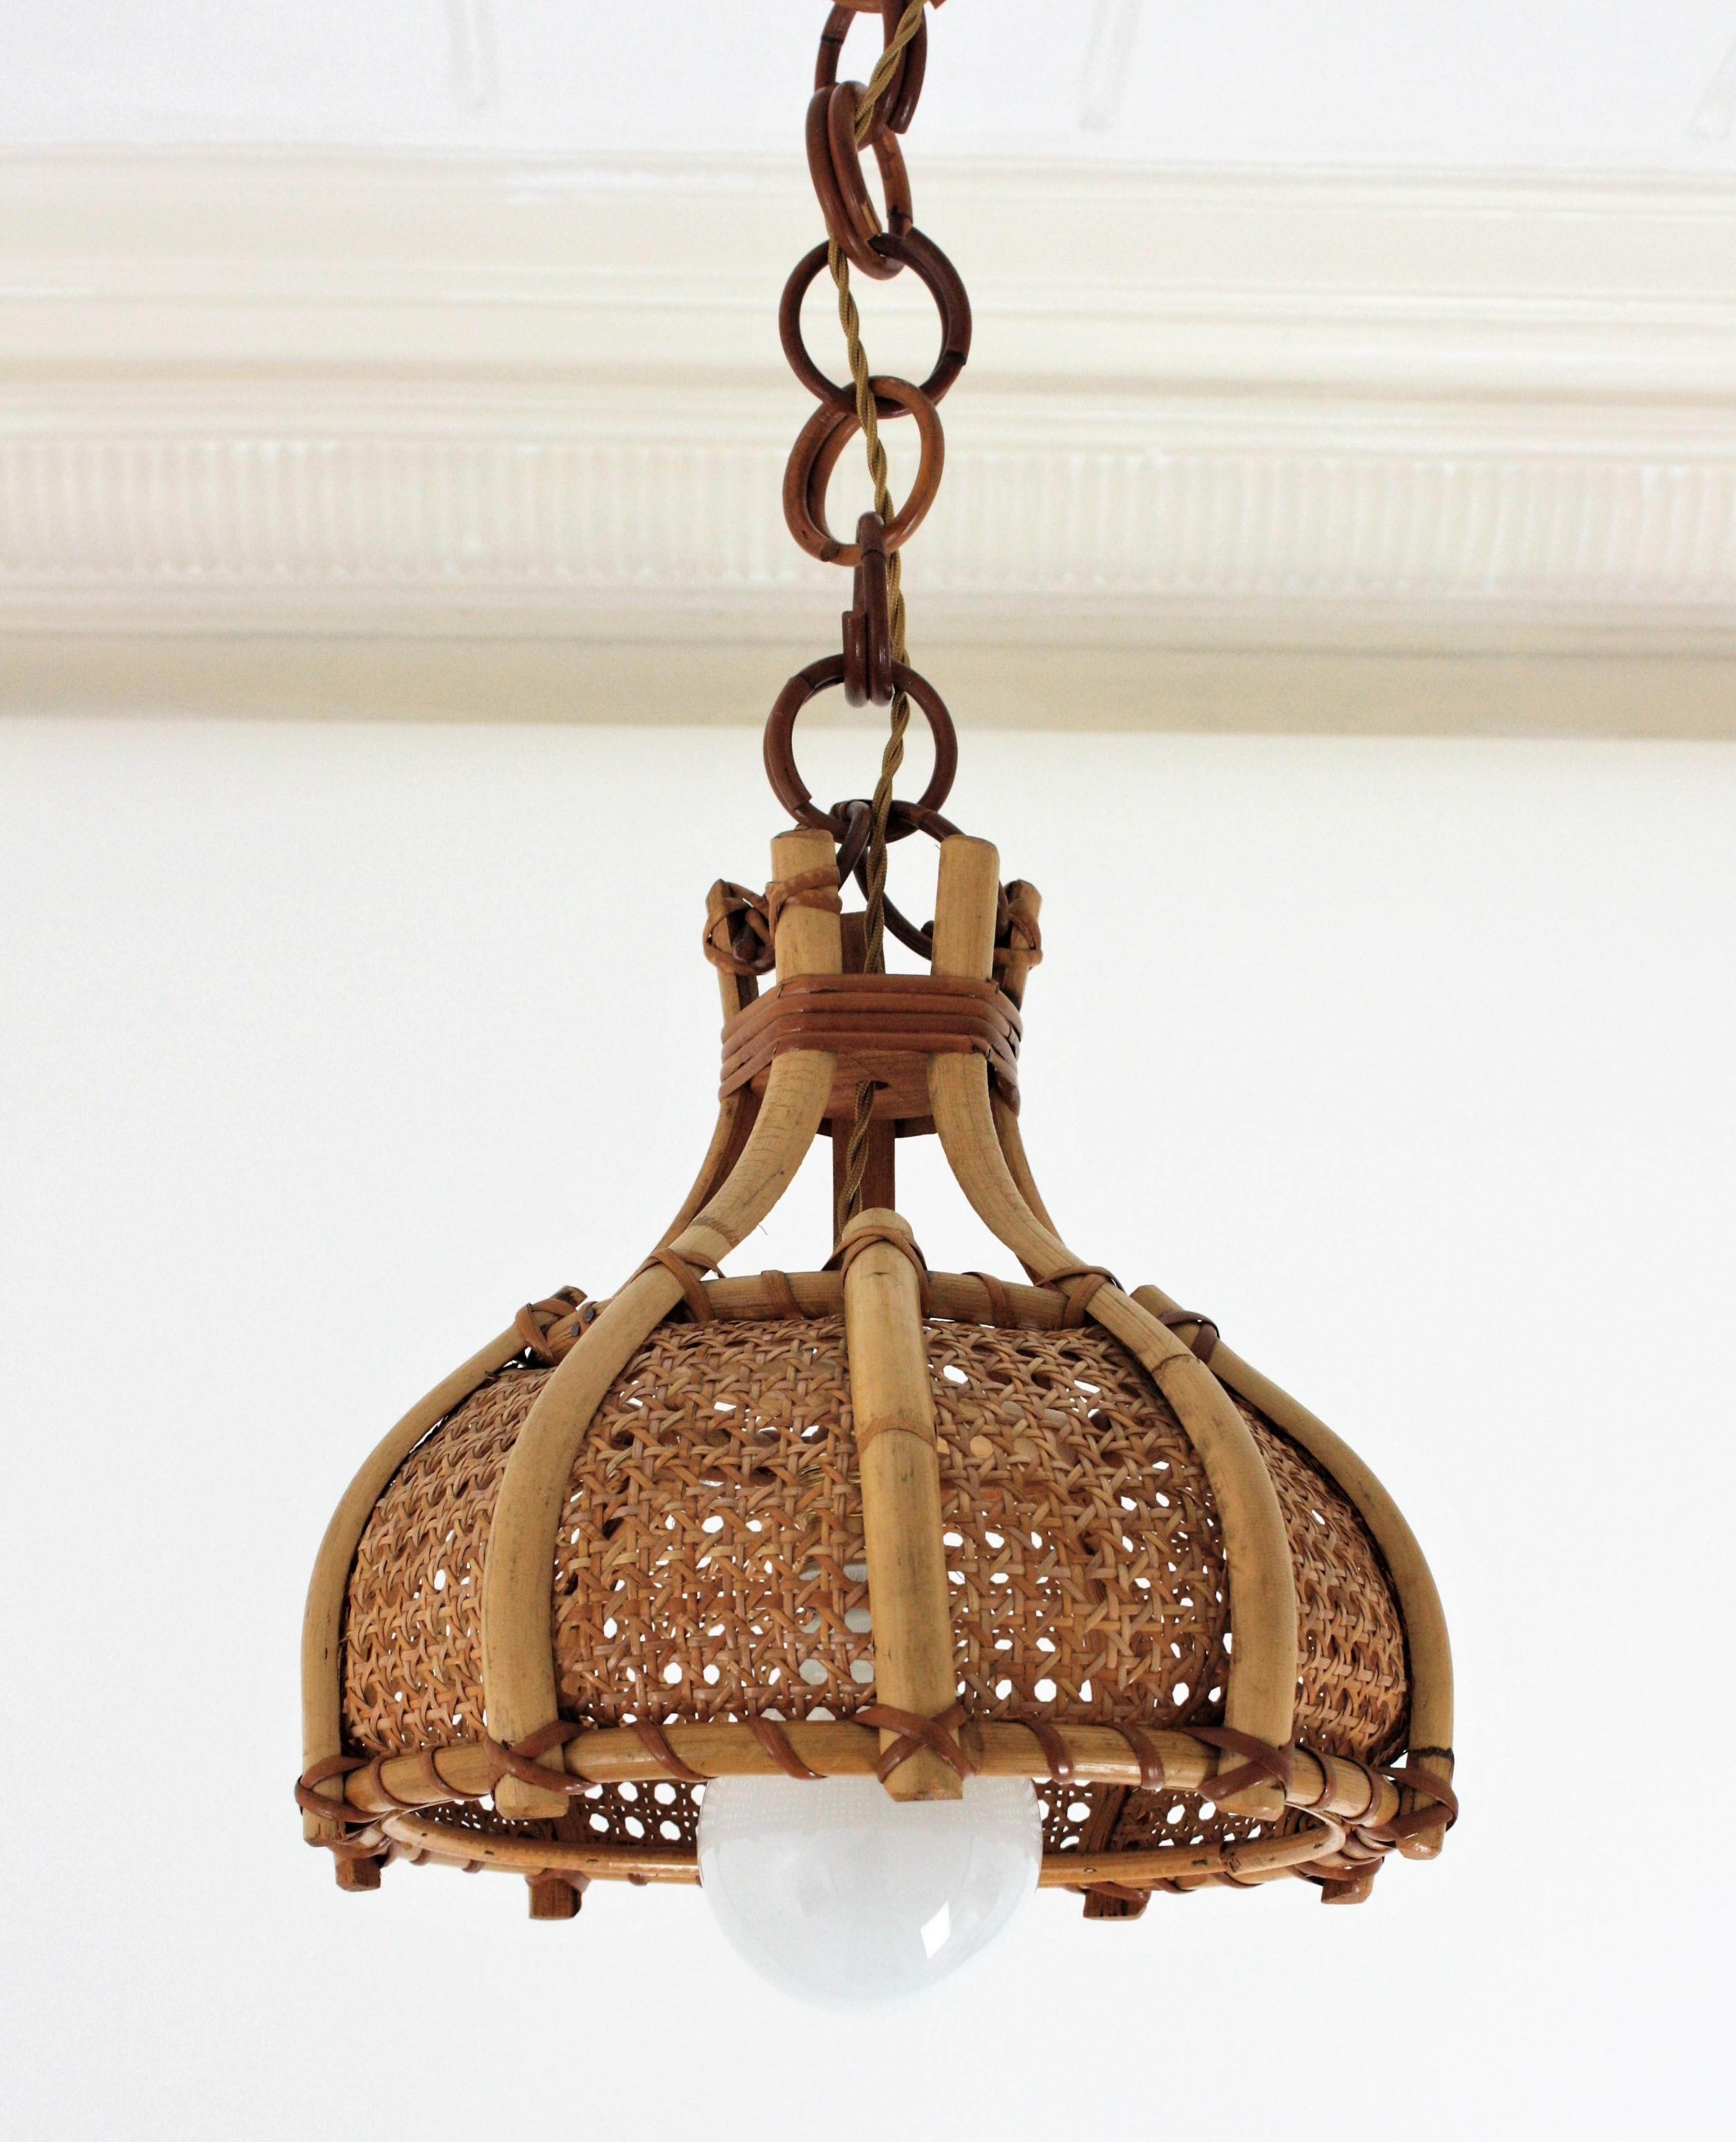 Mid-Century Modern rattan, woven wicker wire and bamboo bell pendant / hanging light, Italy, 1960s.
This beautiful suspension lamp features a bamboo and wicker wire bell shaped shade with bamboo decorative vertical bars. The shade is accented by